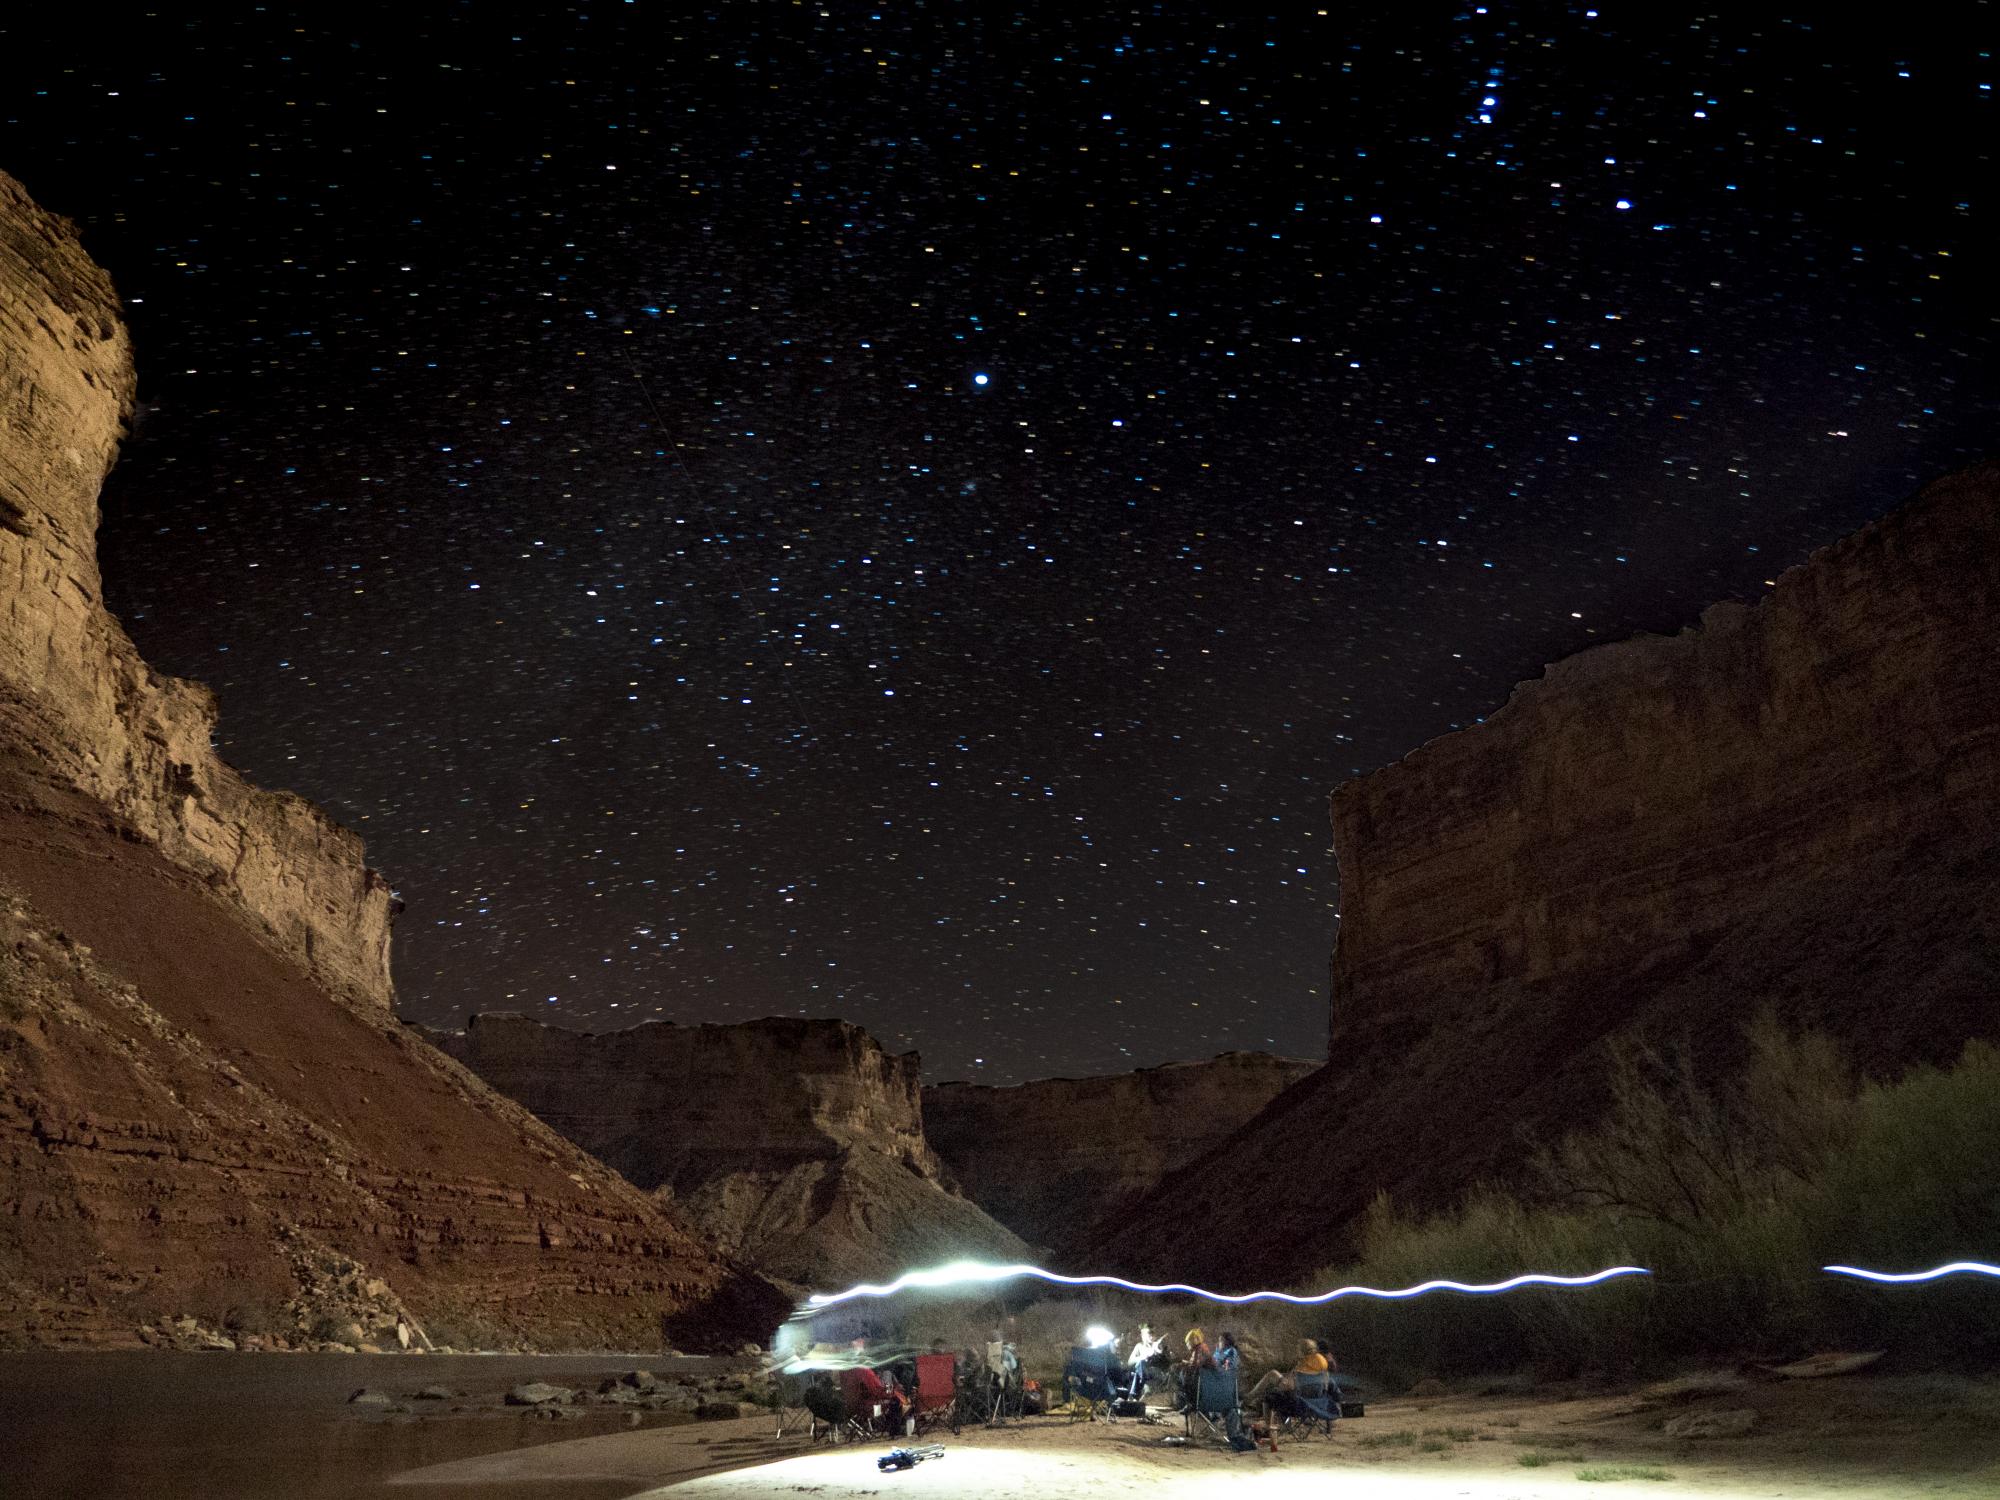 Night sky of stars at the Grand Canyon